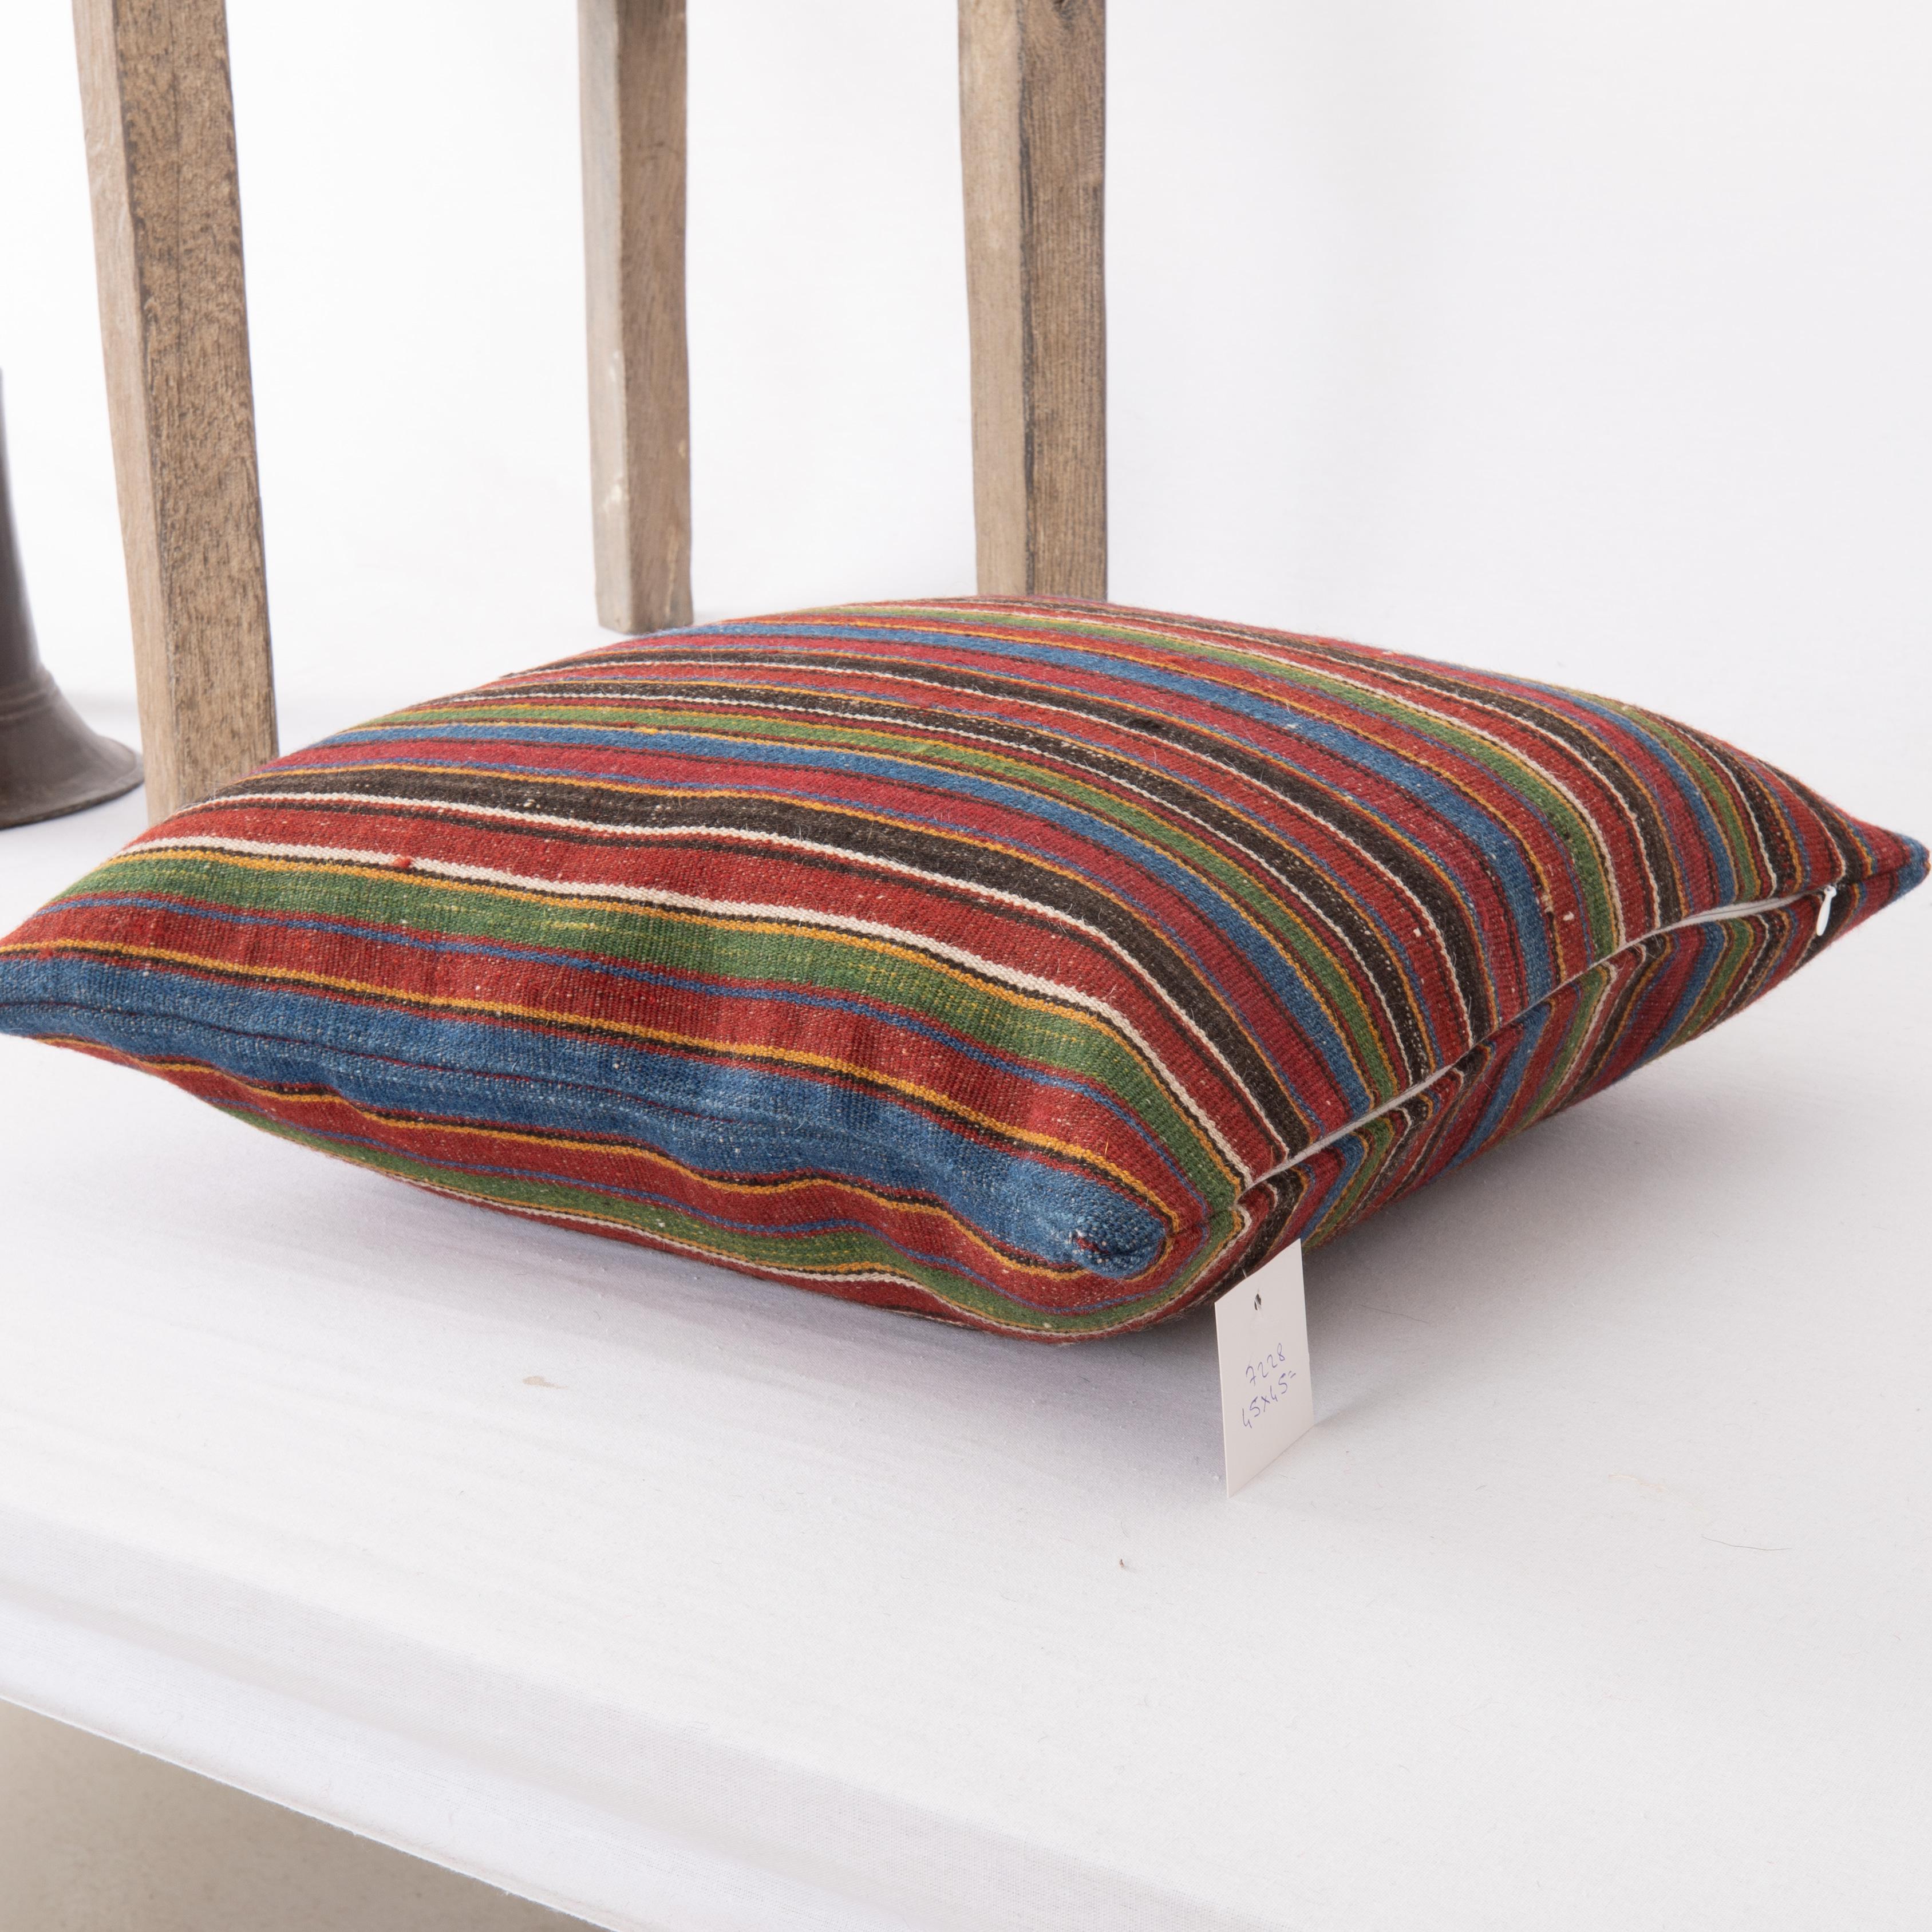 Double Sided Kilim Pillow Cover Made From an Antique Kilim In Good Condition For Sale In Istanbul, TR